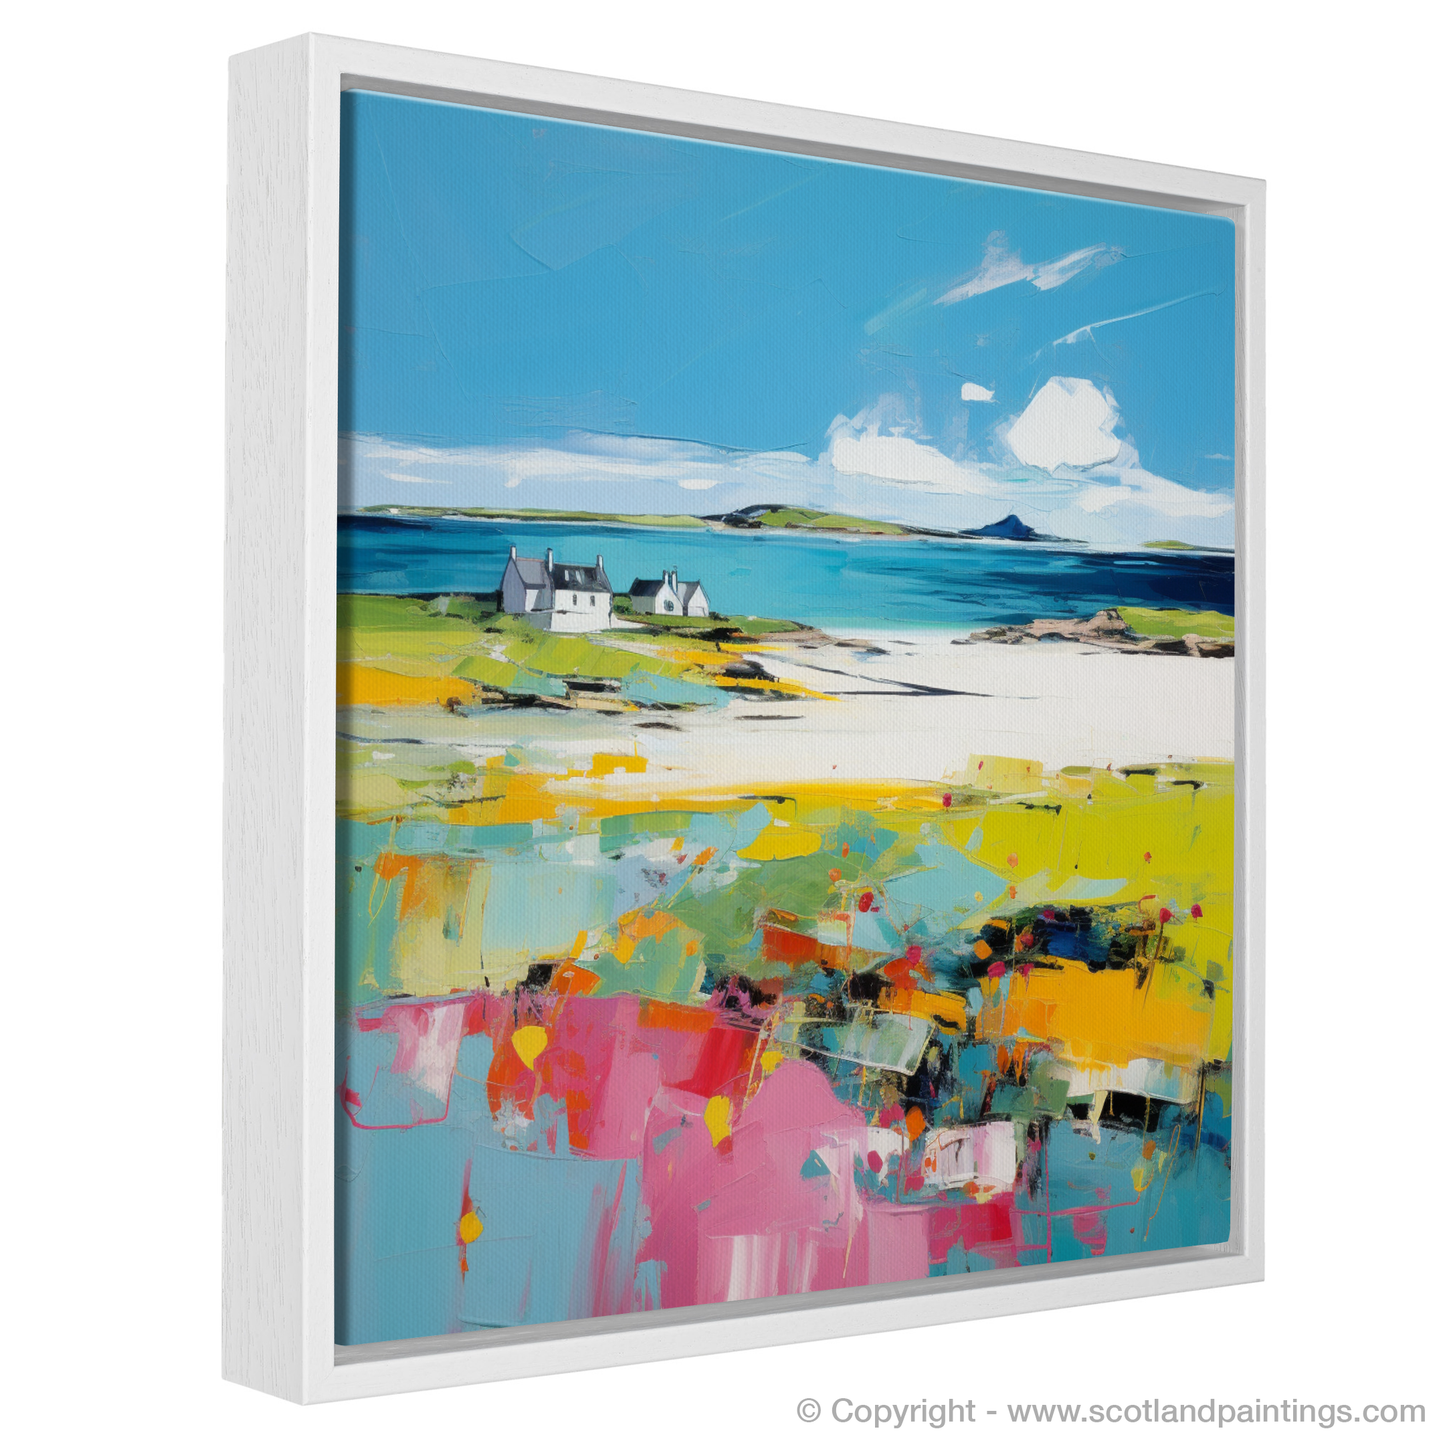 Painting and Art Print of Isle of Tiree, Inner Hebrides in summer entitled "Abstract Essence of Tiree Summer".